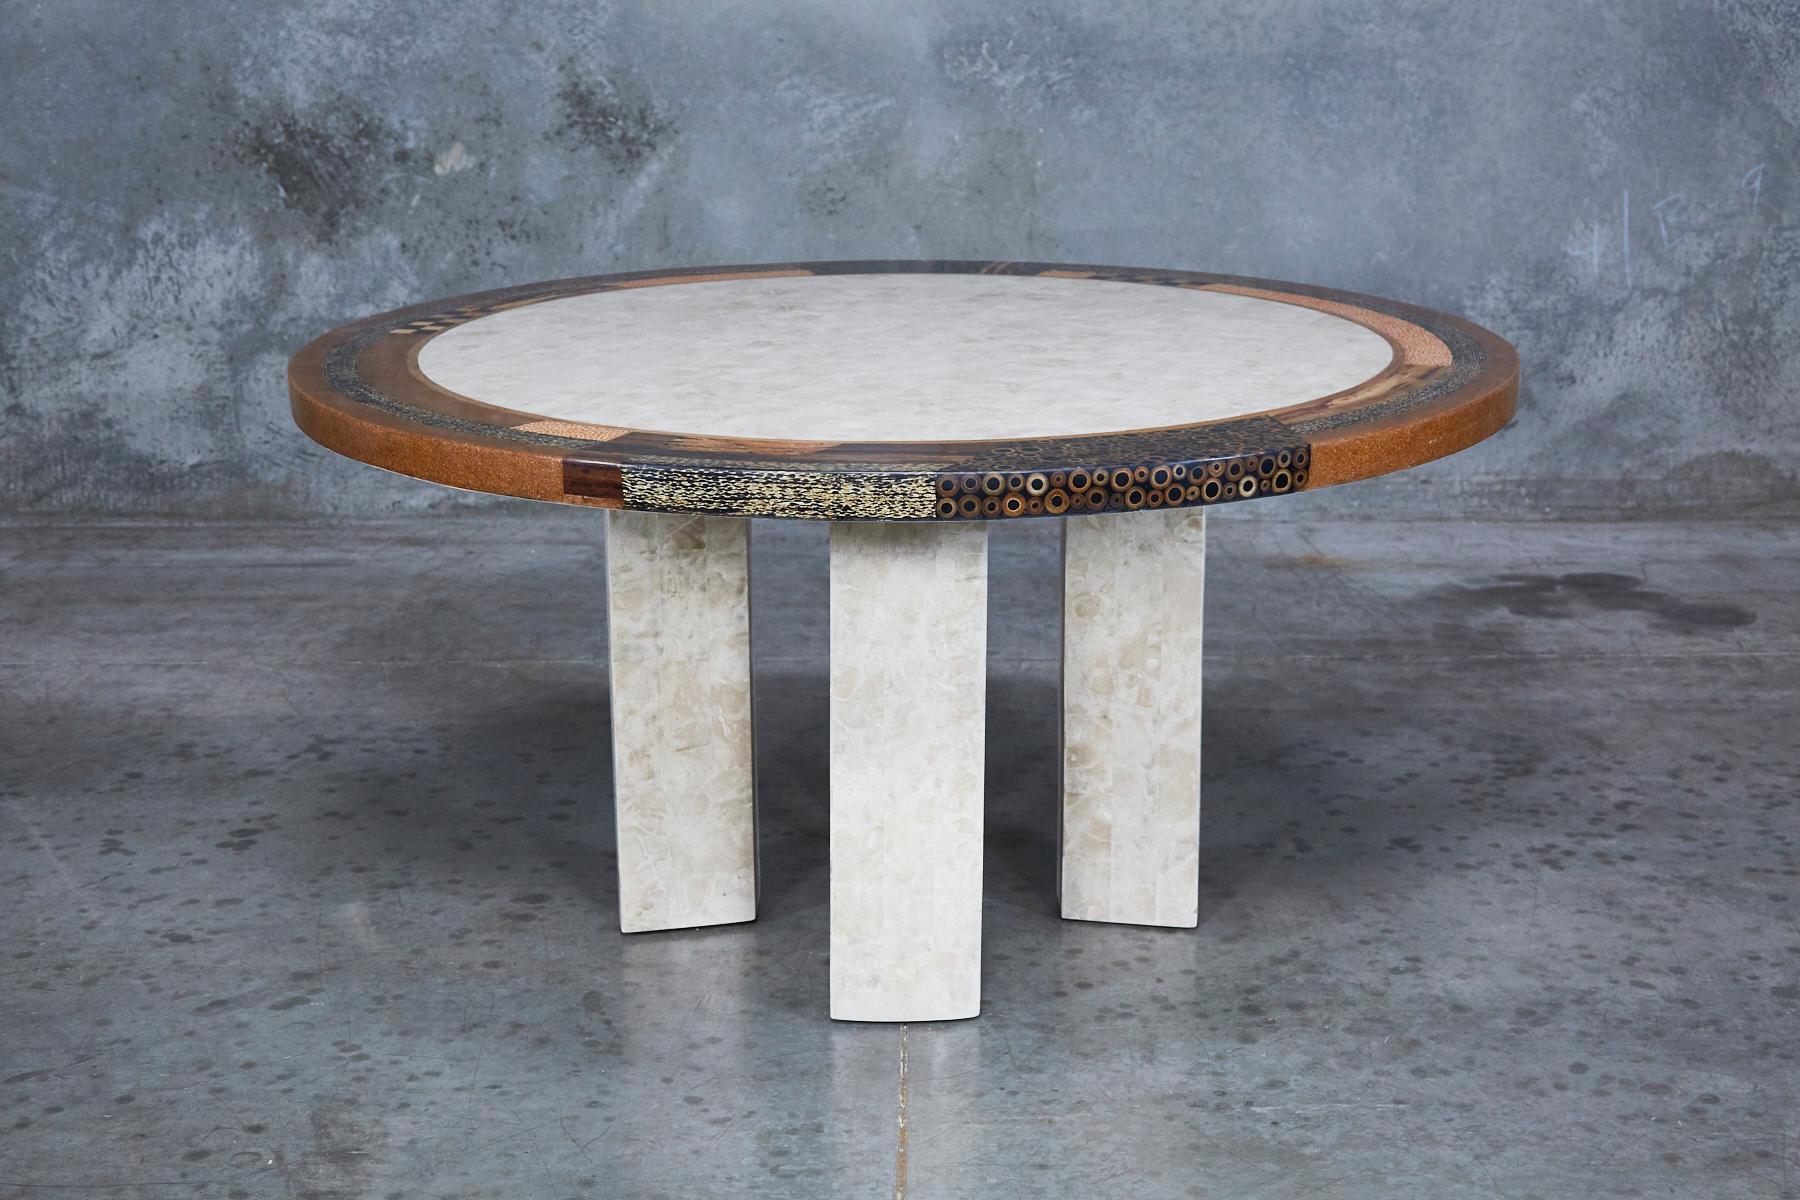 Round dining table with rectangular columnar legs and 60 in. diameter top, both in tessellated stone. Tabletop with decorative edging featuring inlaid exotic natural materials including bamboo, cotton husks, honeycomb cane leaf, corn tassel, and